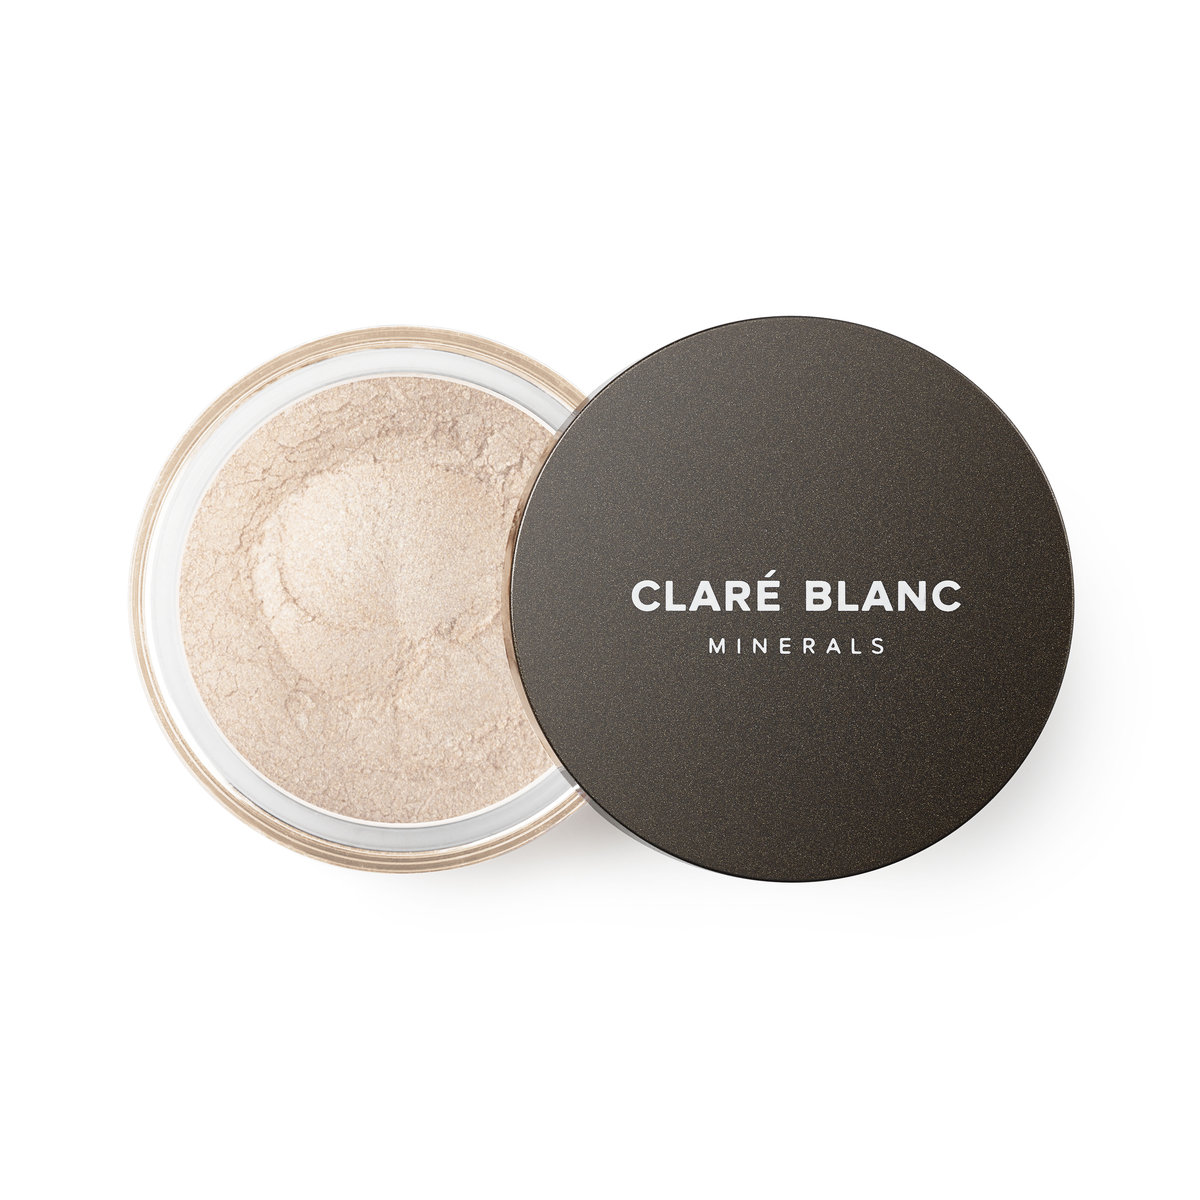 CLARE BLANC DR MAKEUP COLLECTION MINERAL EYE SHADOW Mineralny CLASSIC NUDE 833 CLABEMDPO-DOPO